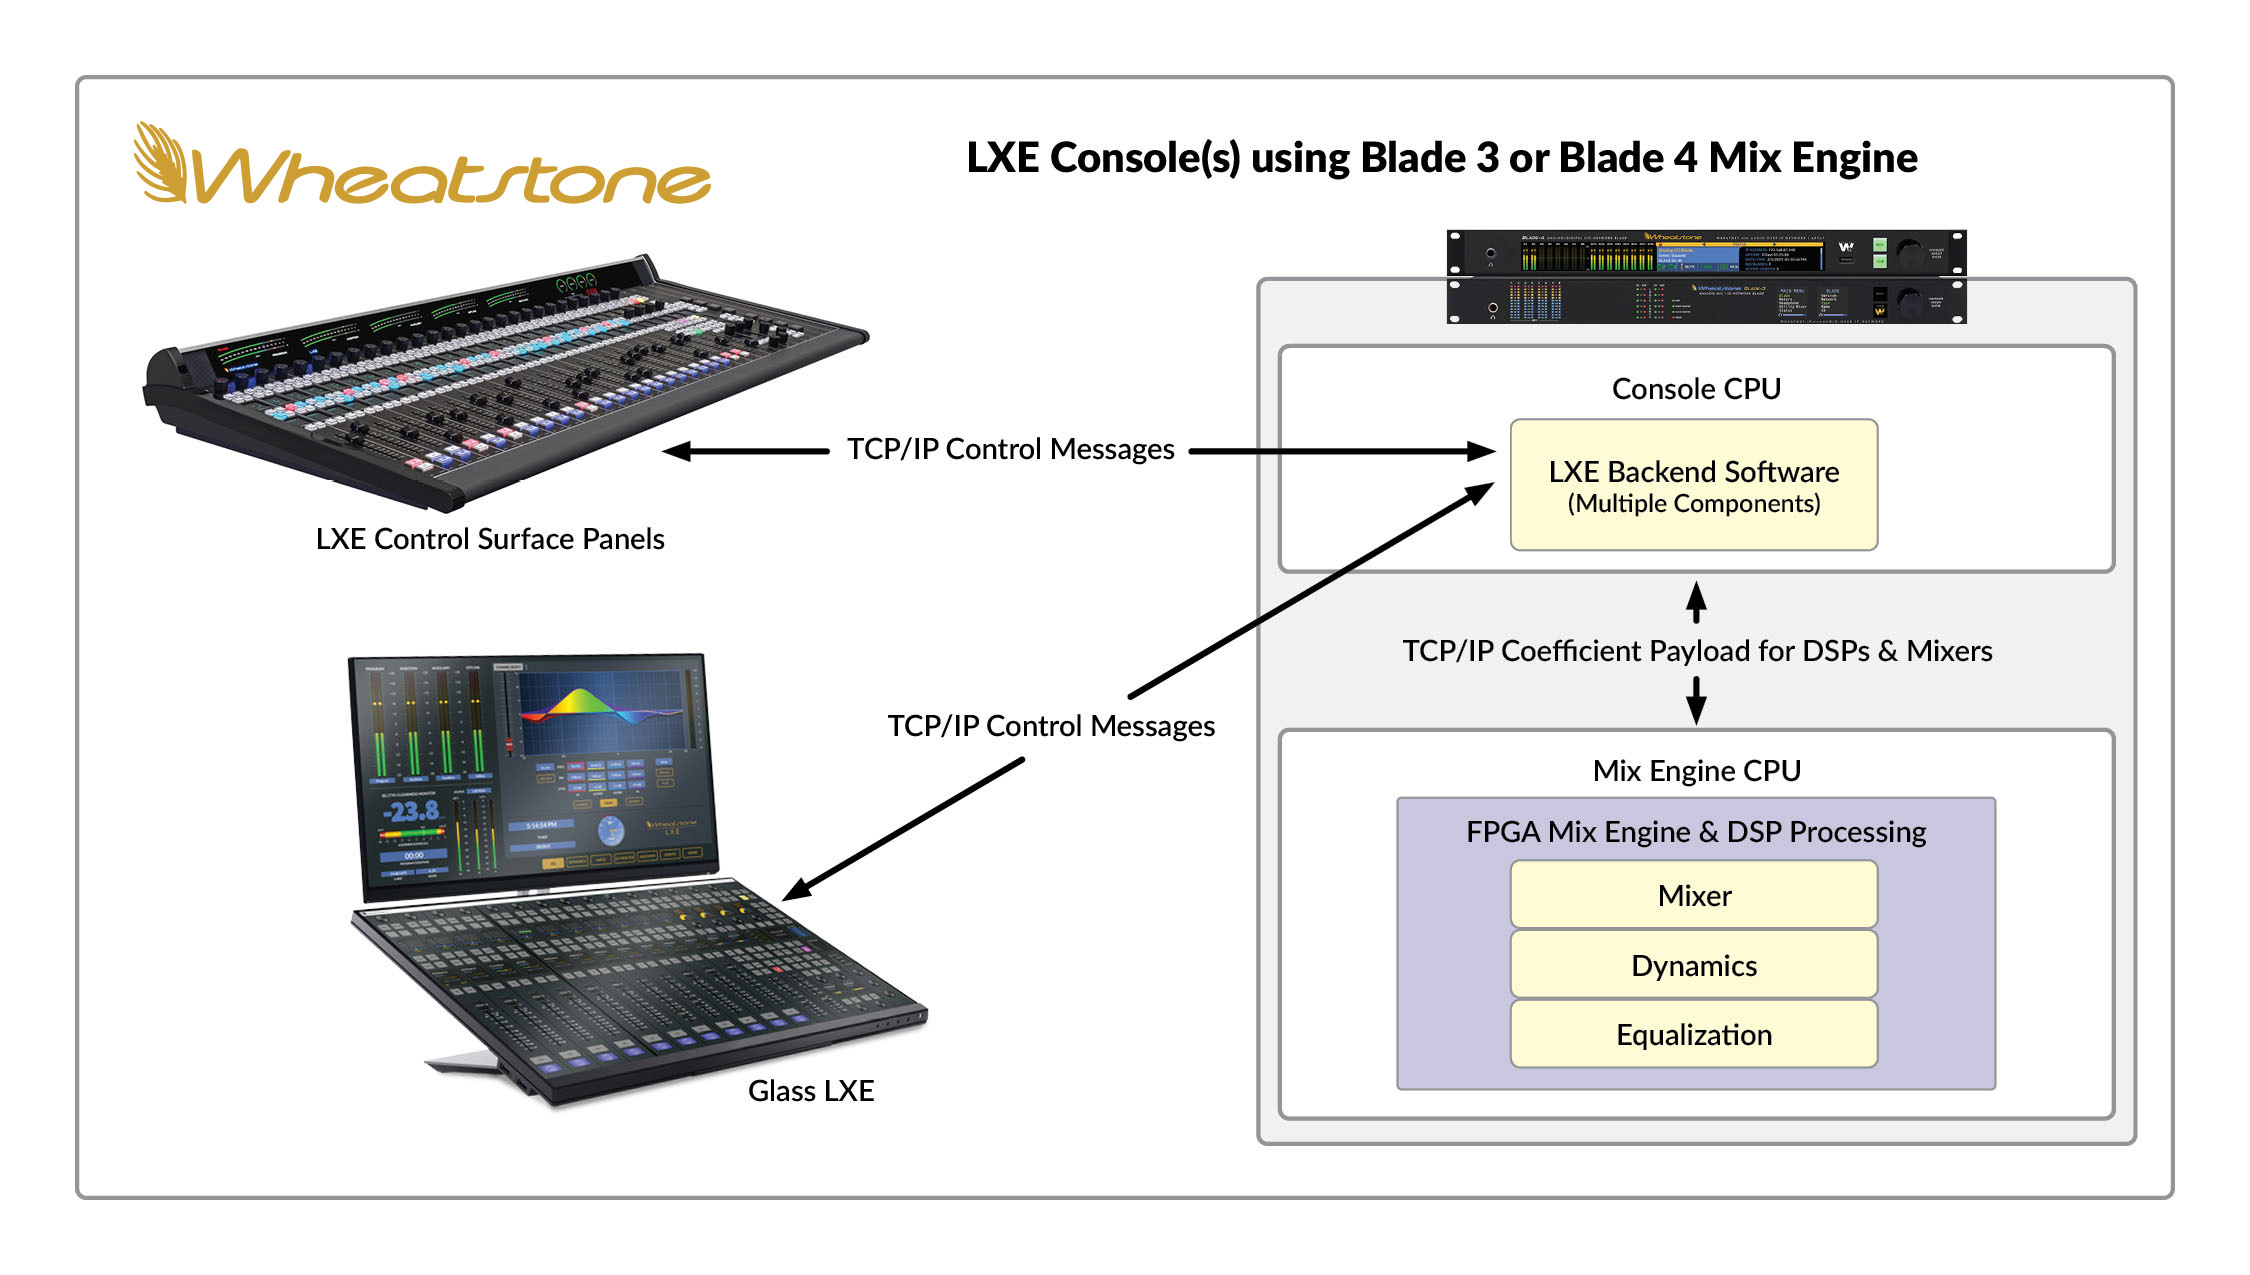 LXE Console(s) using Blade 3 or Blade 4 Mix Engine